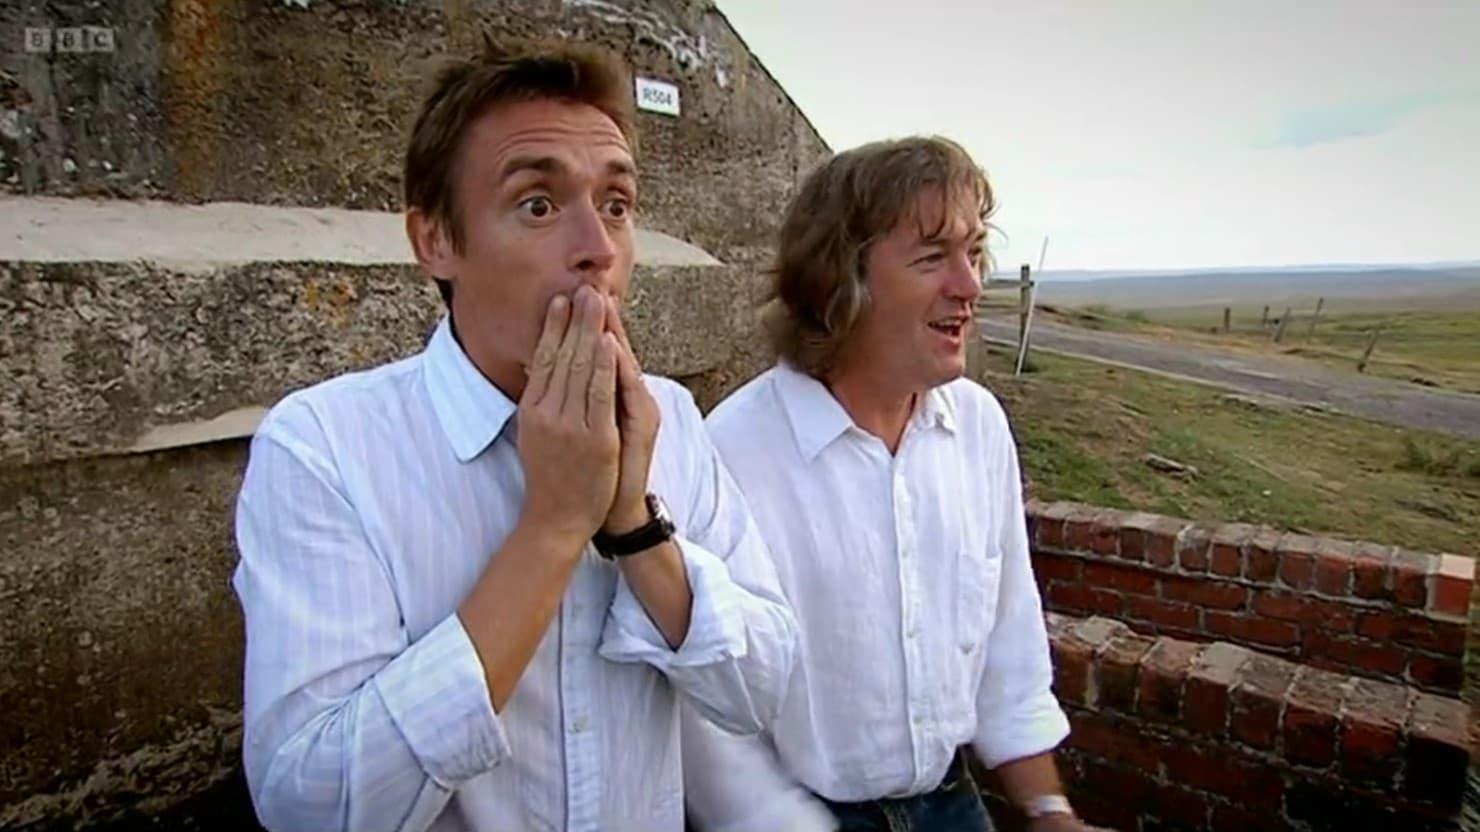 Top Gear: The Challenges backdrop